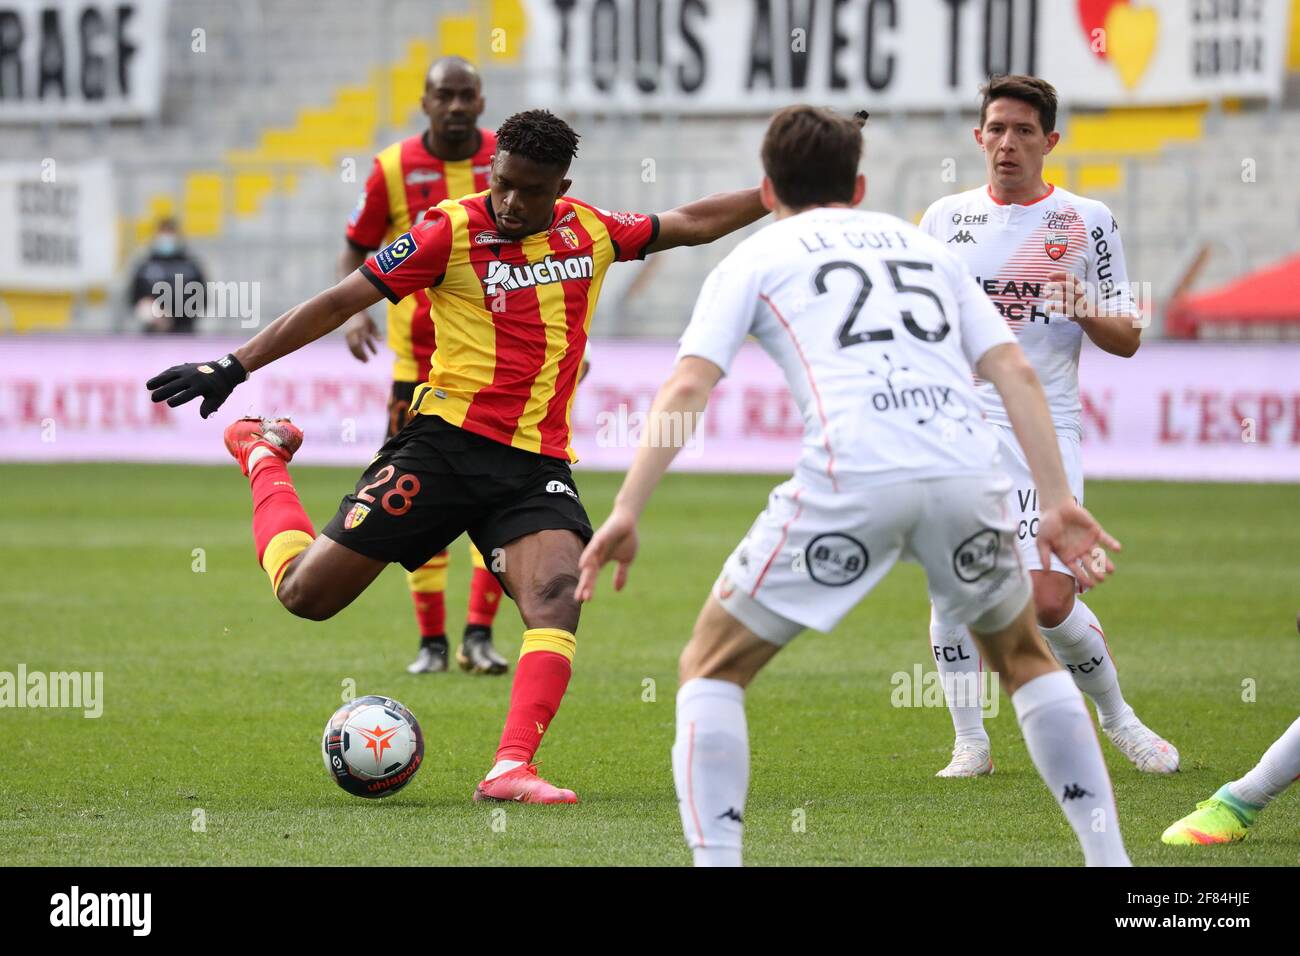 Lens, France. 11th Apr, 2021. Shoot Doucoure 28 RC Lens during the French  championship Ligue 1 football match between RC Lens and FC Lorient on April  11, 2021 at Bollaert-Delelis stadium in